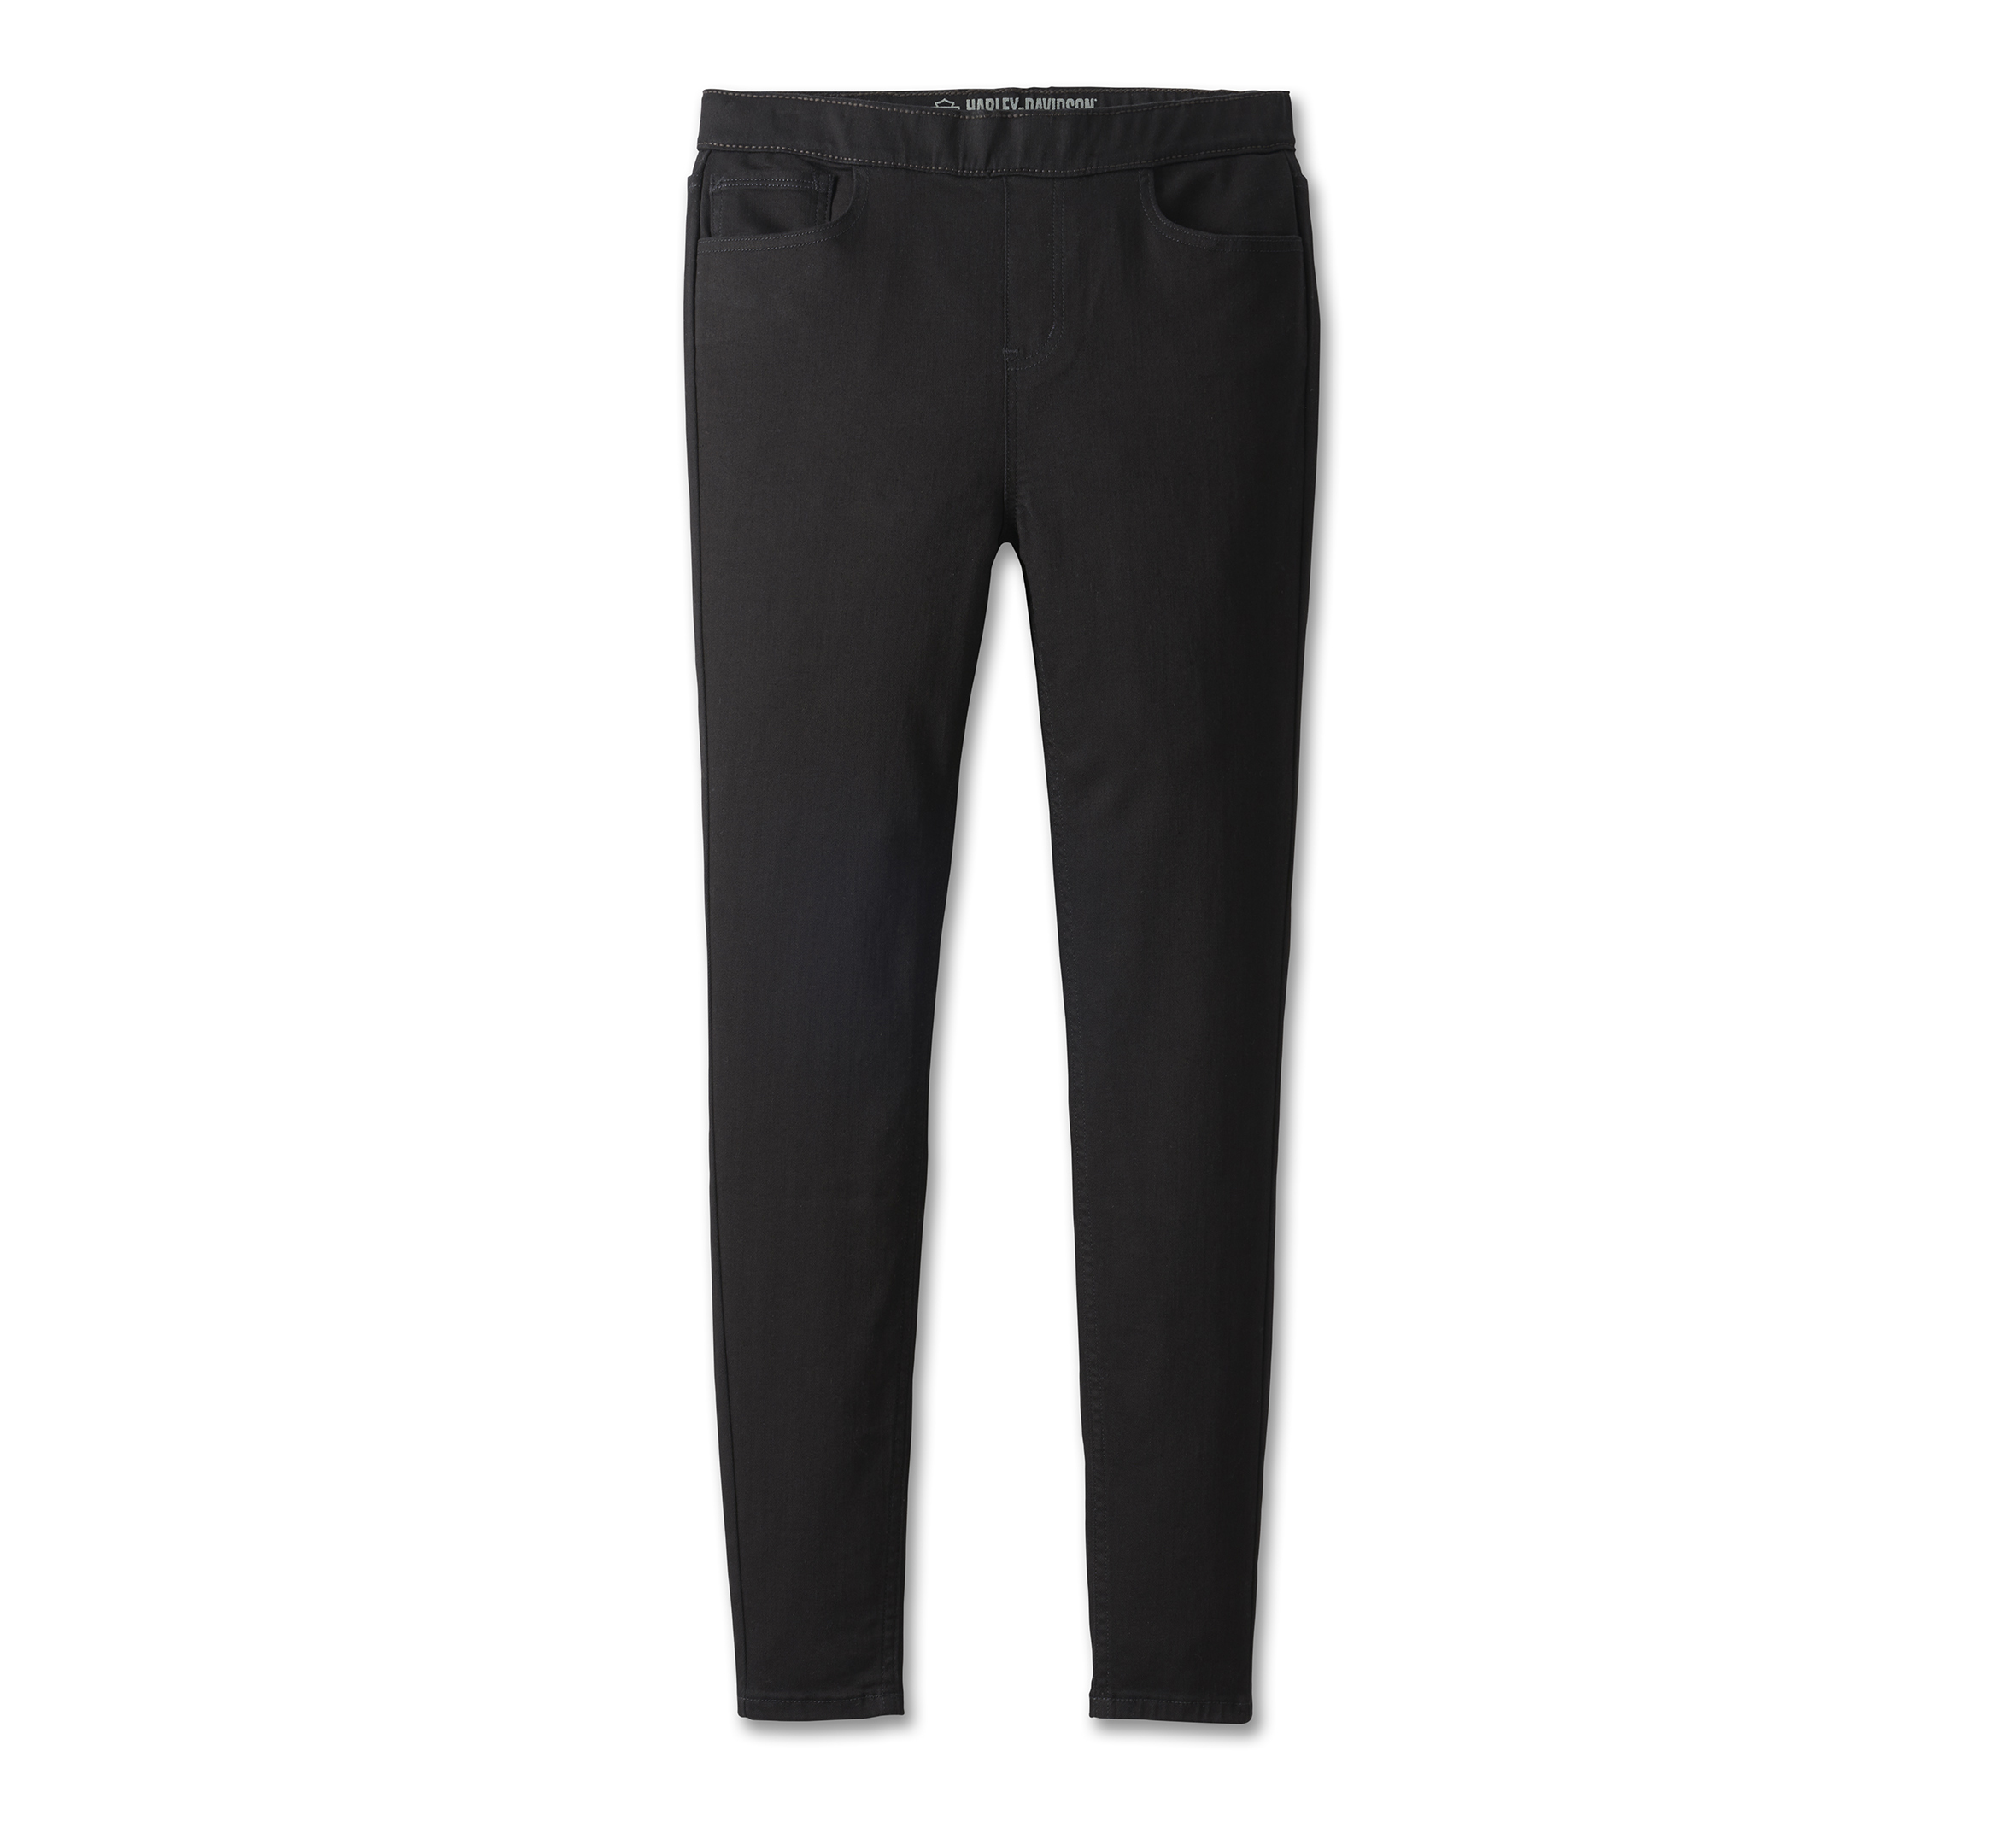 Uniqlo mens pants, Men's Fashion, Bottoms, Jeans on Carousell